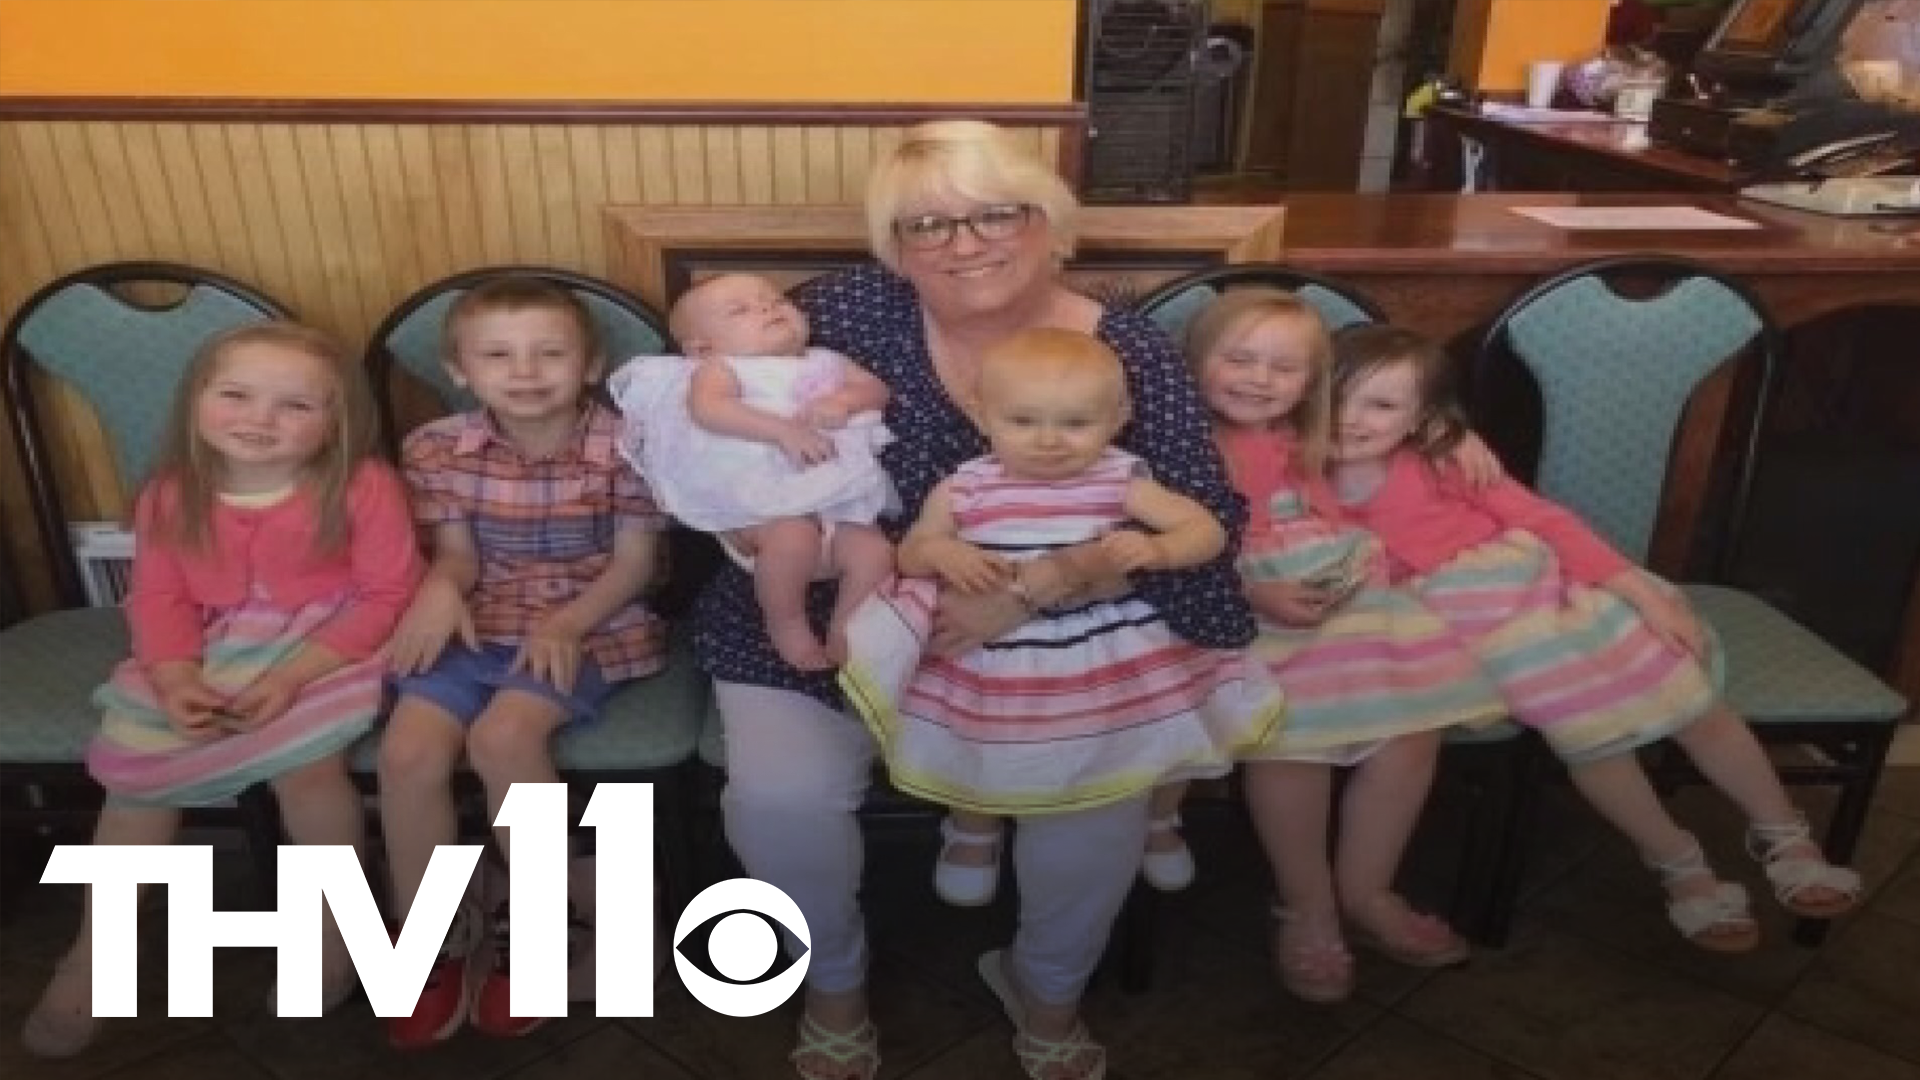 Jamie Sheffield was a special education teacher and cheer coach, but most importantly, a grandmother who loved her grandchildren more than anything.